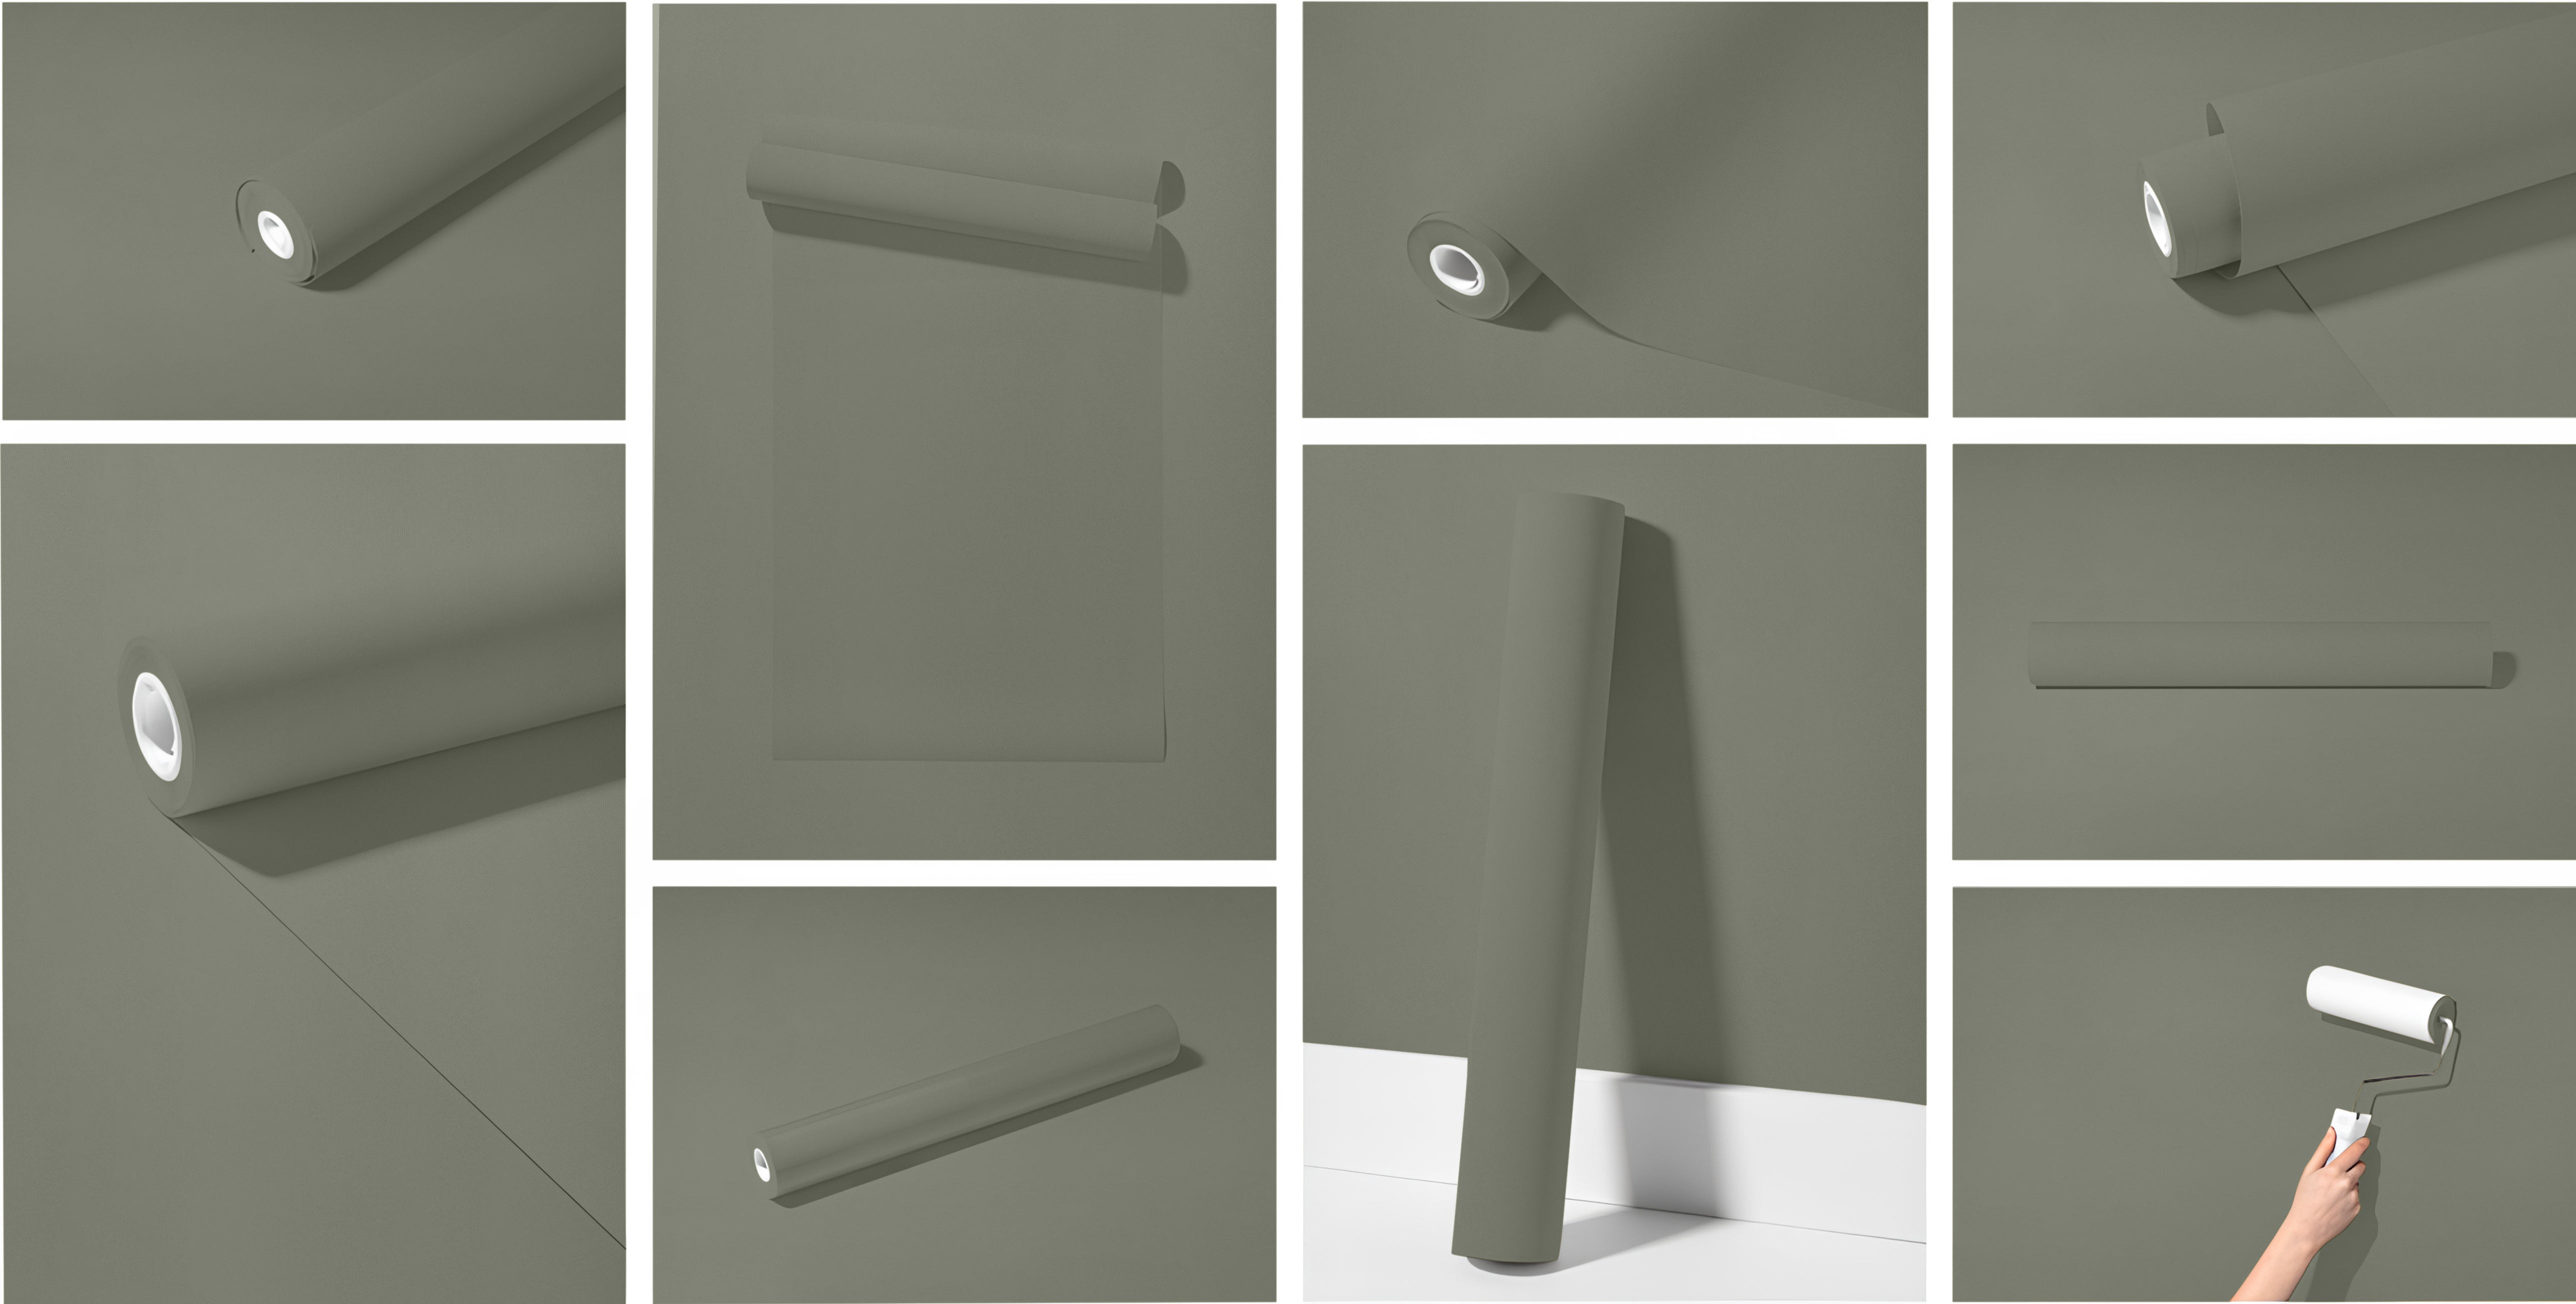 Peel & Stick Removable Re-usable Paint - Color RAL 7033 Cement Grey - offRAL™ - RALRAW LLC, USA